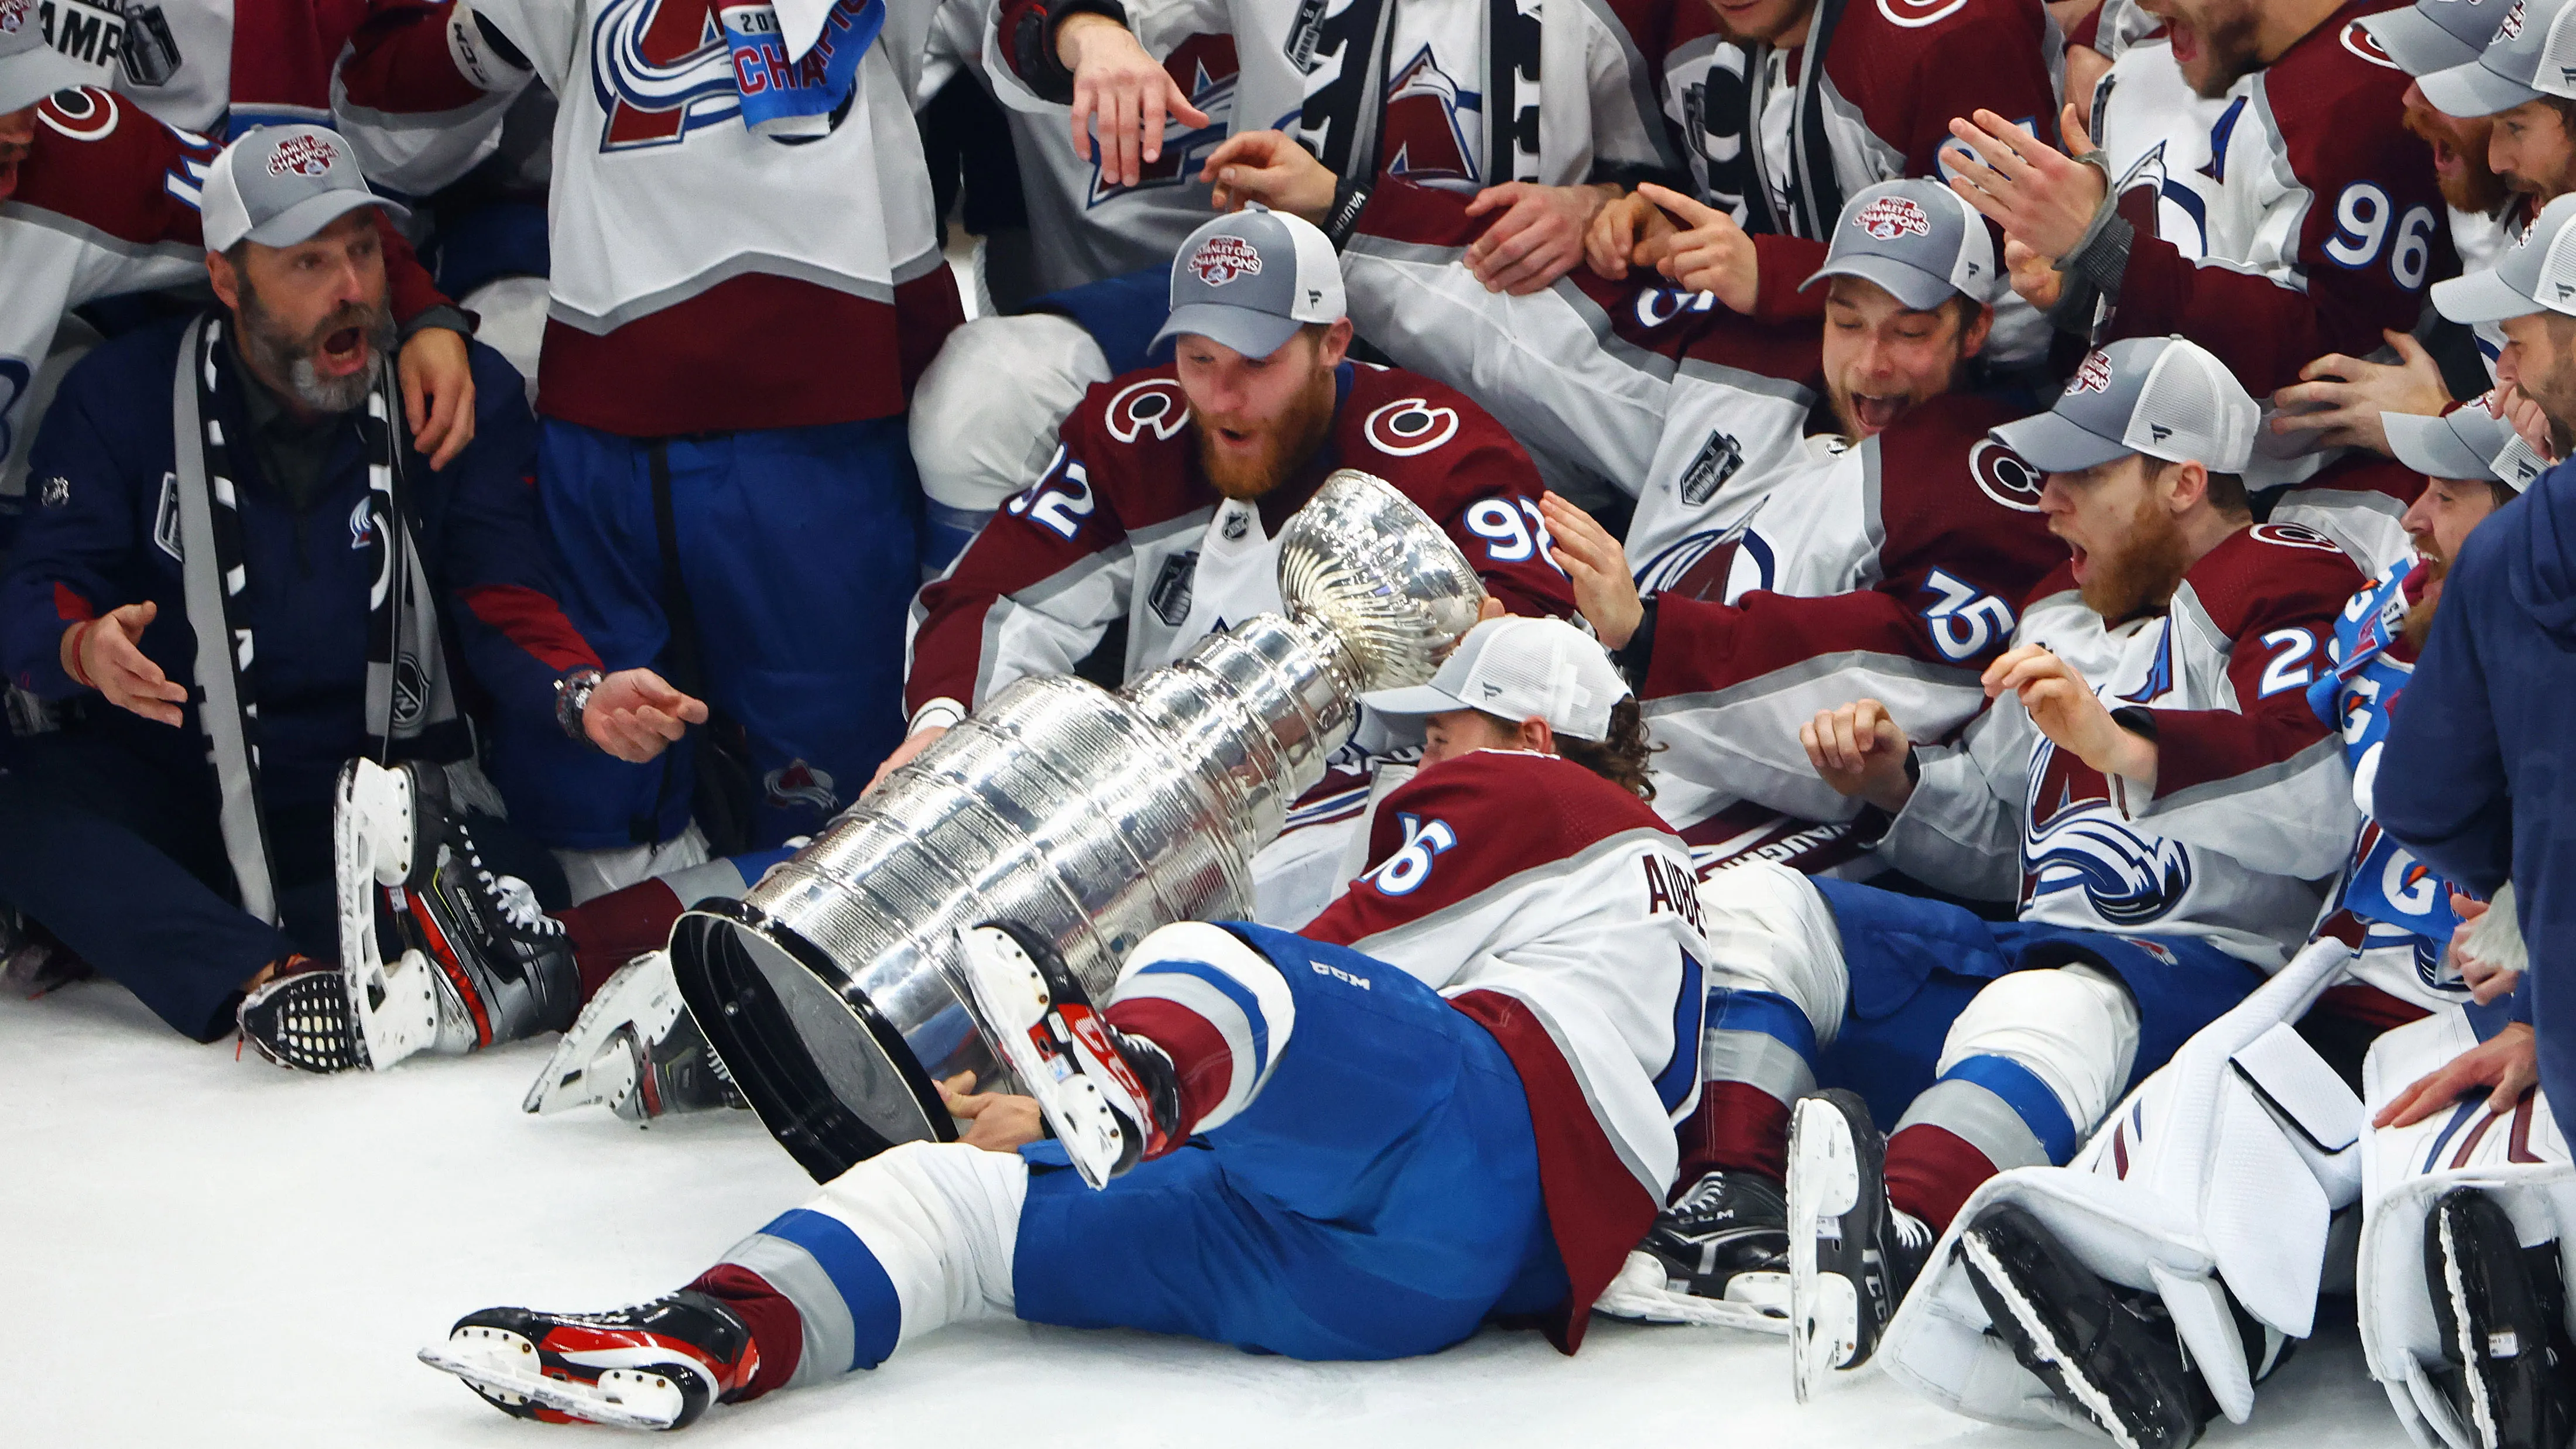 List: 8 times Stanley Cup celebrations resulted in dented, damaged